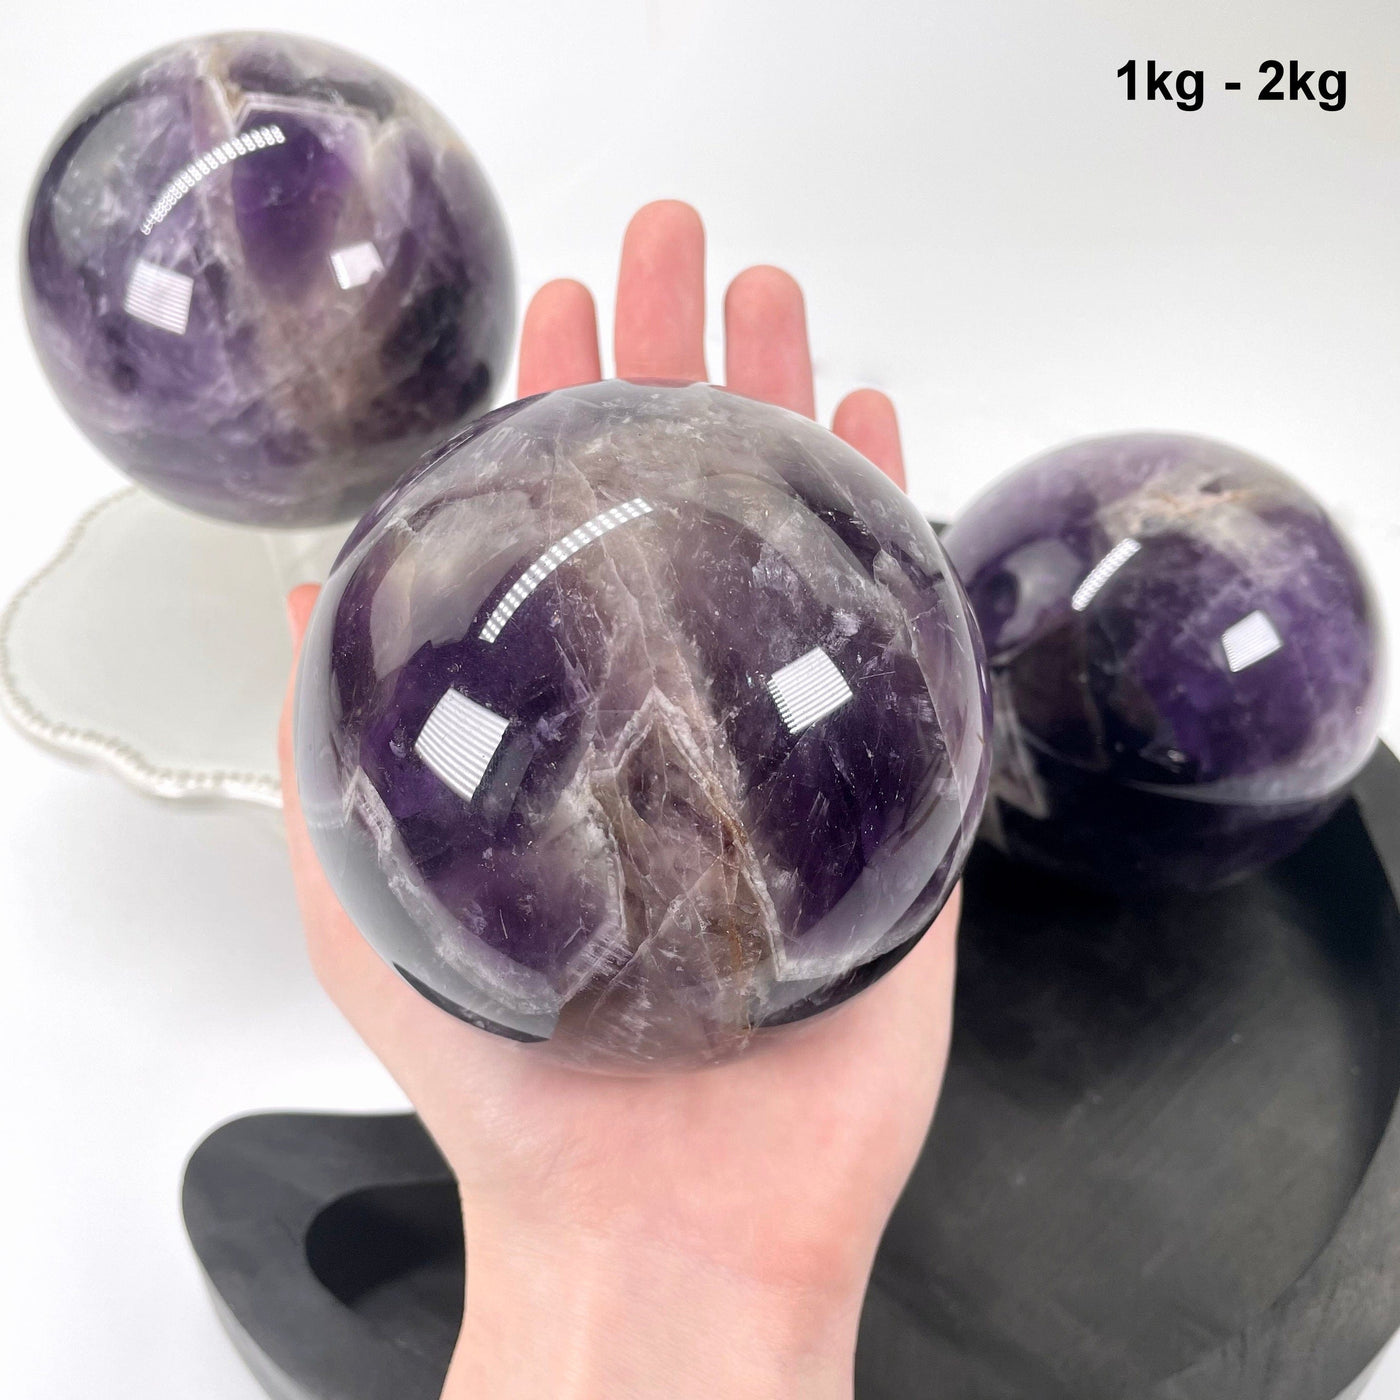 1kg - 2kg chevron amethyst polished sphere in hand with two others in background display